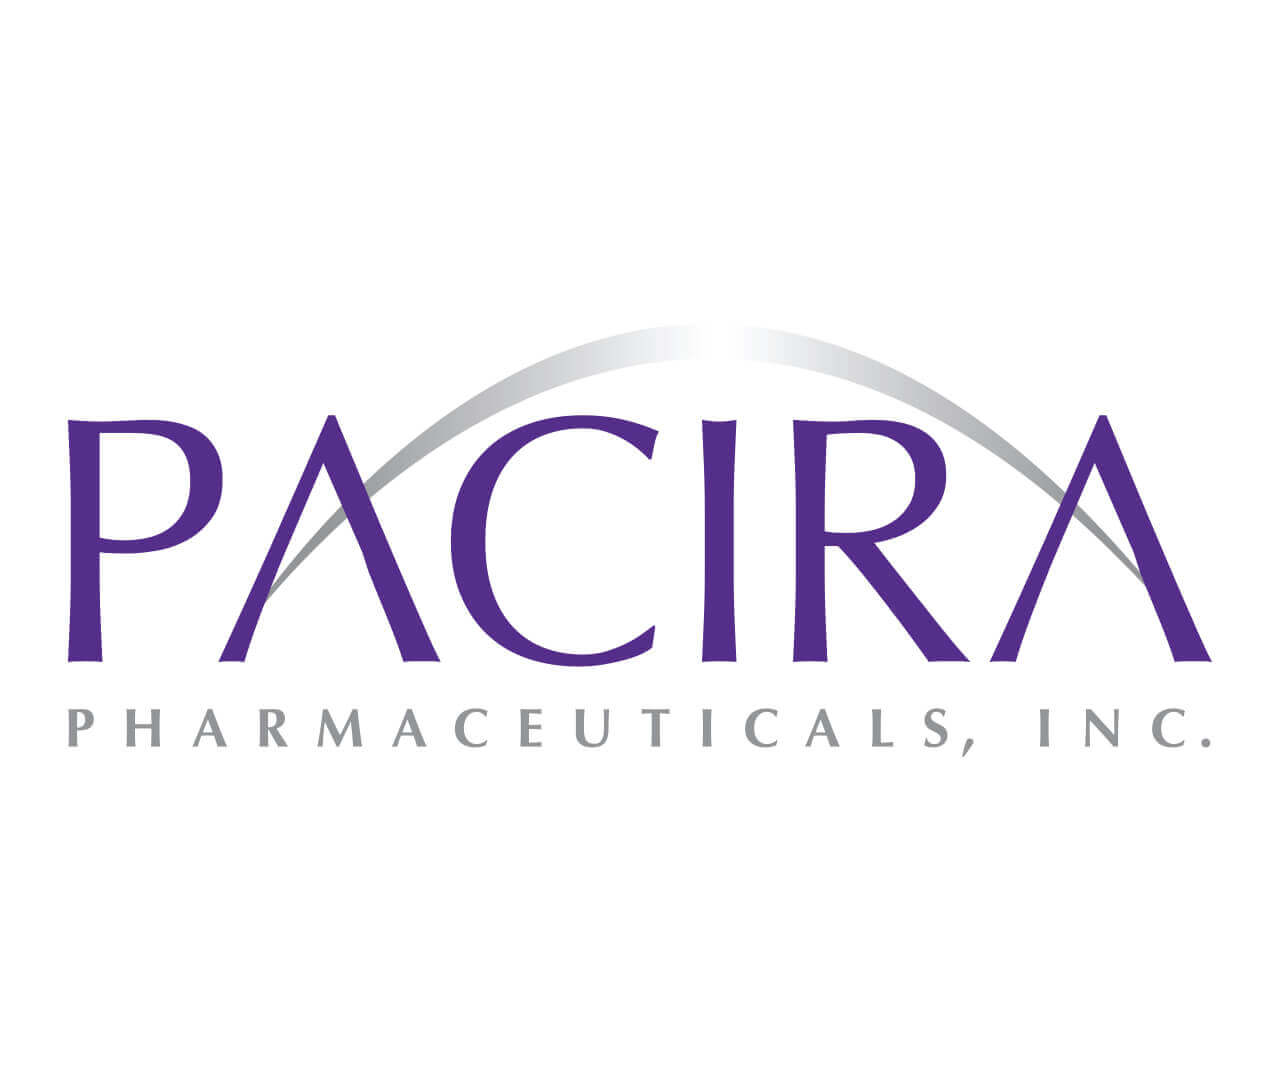 Coyne PR and Pacira Pharmaceuticals Honored By PRSA